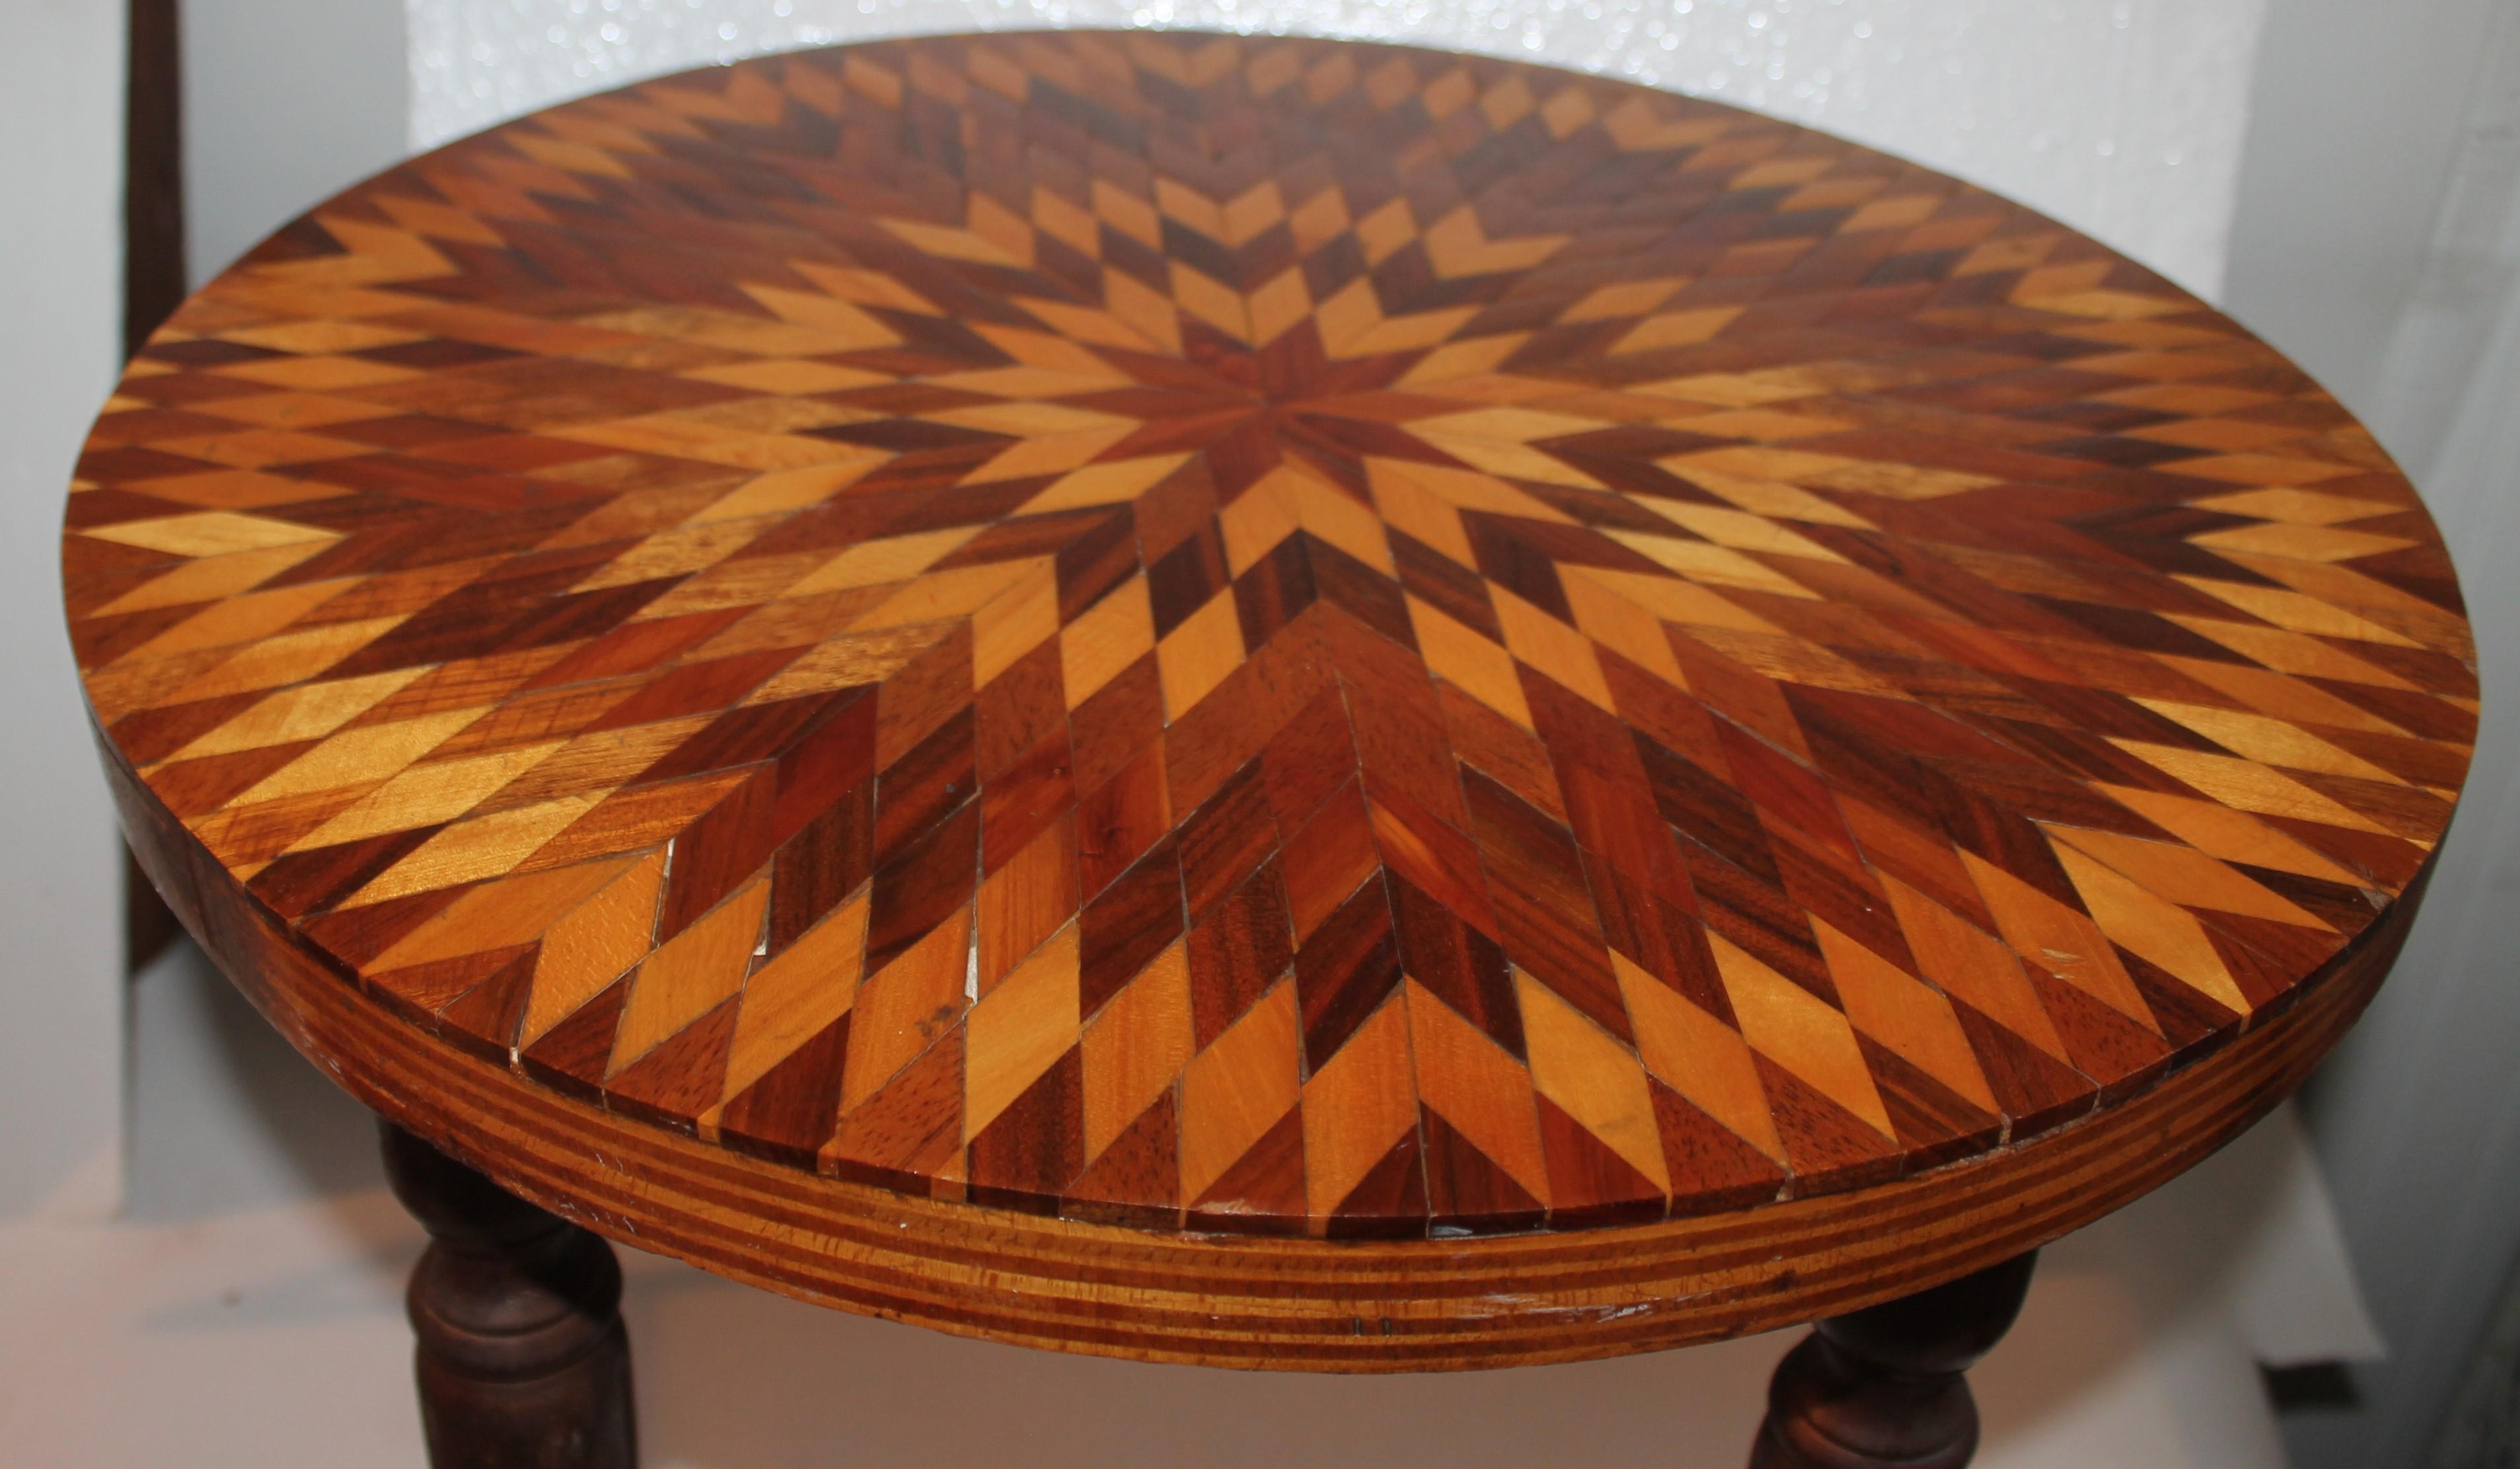 American Folk Art Inlaid Side Table with Starburst